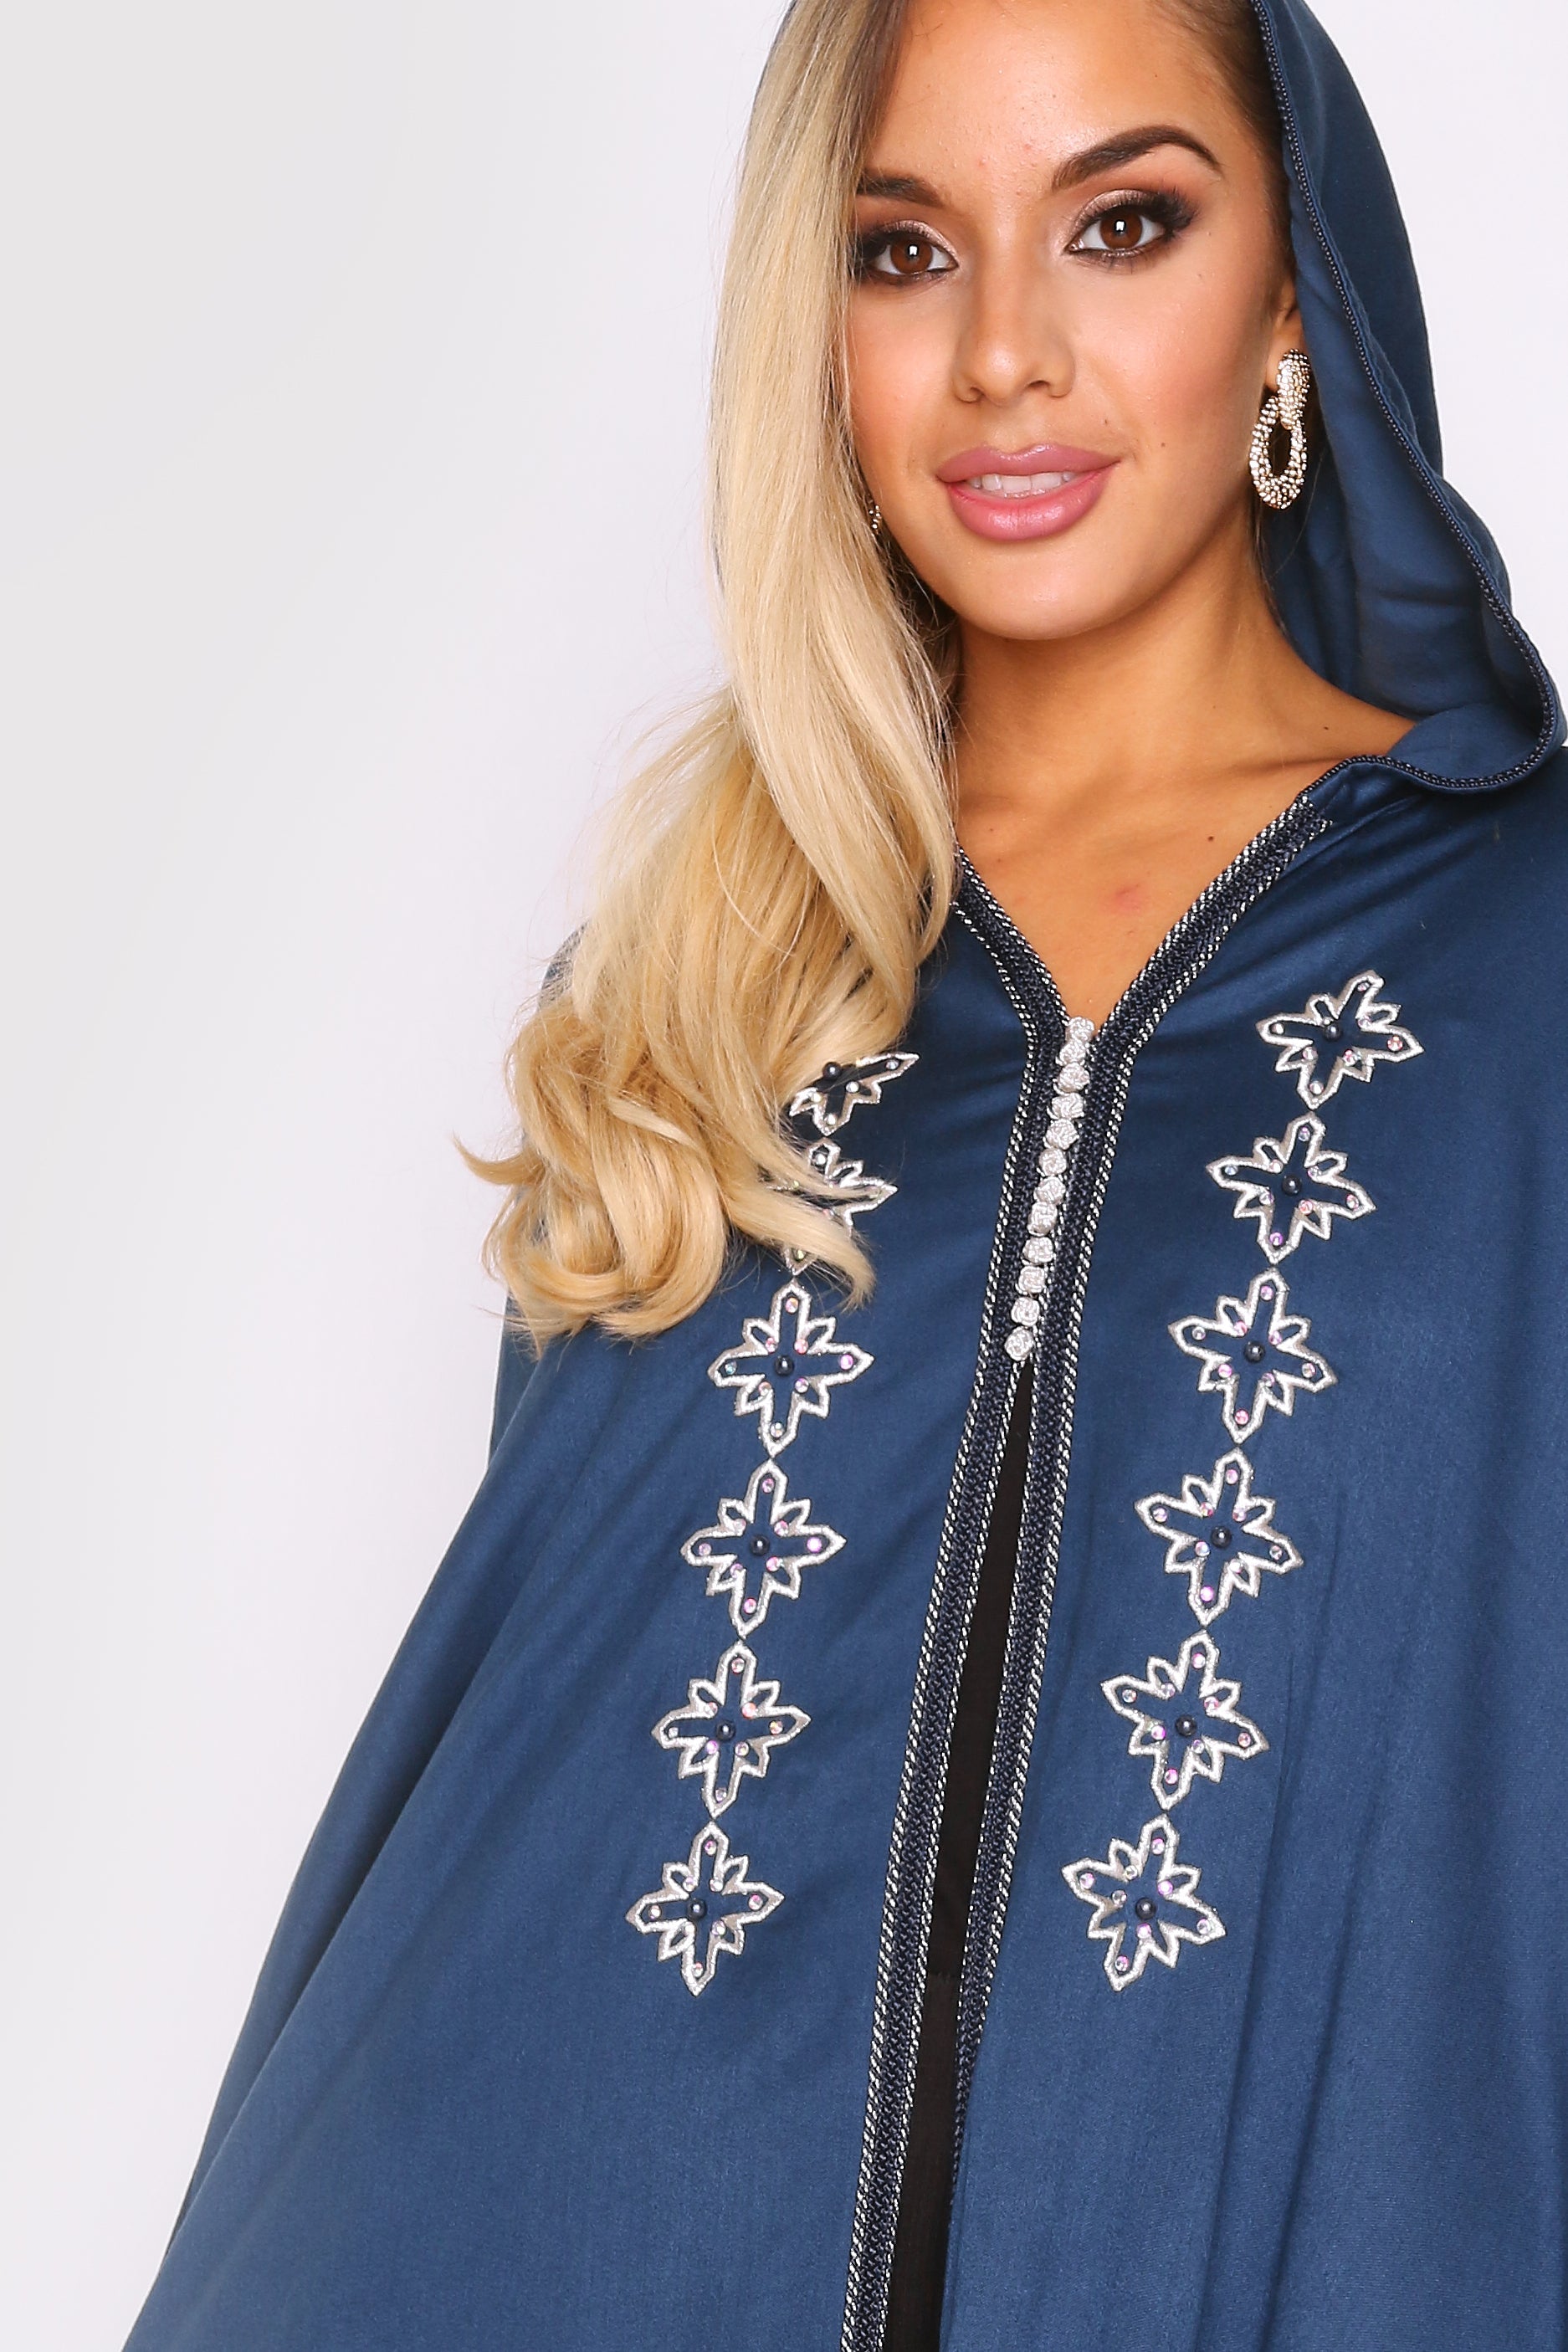 Selham Ismahan Embroidered Full-Length Lightweight Hooded Cape Jacket Cover Up in Navy Blue